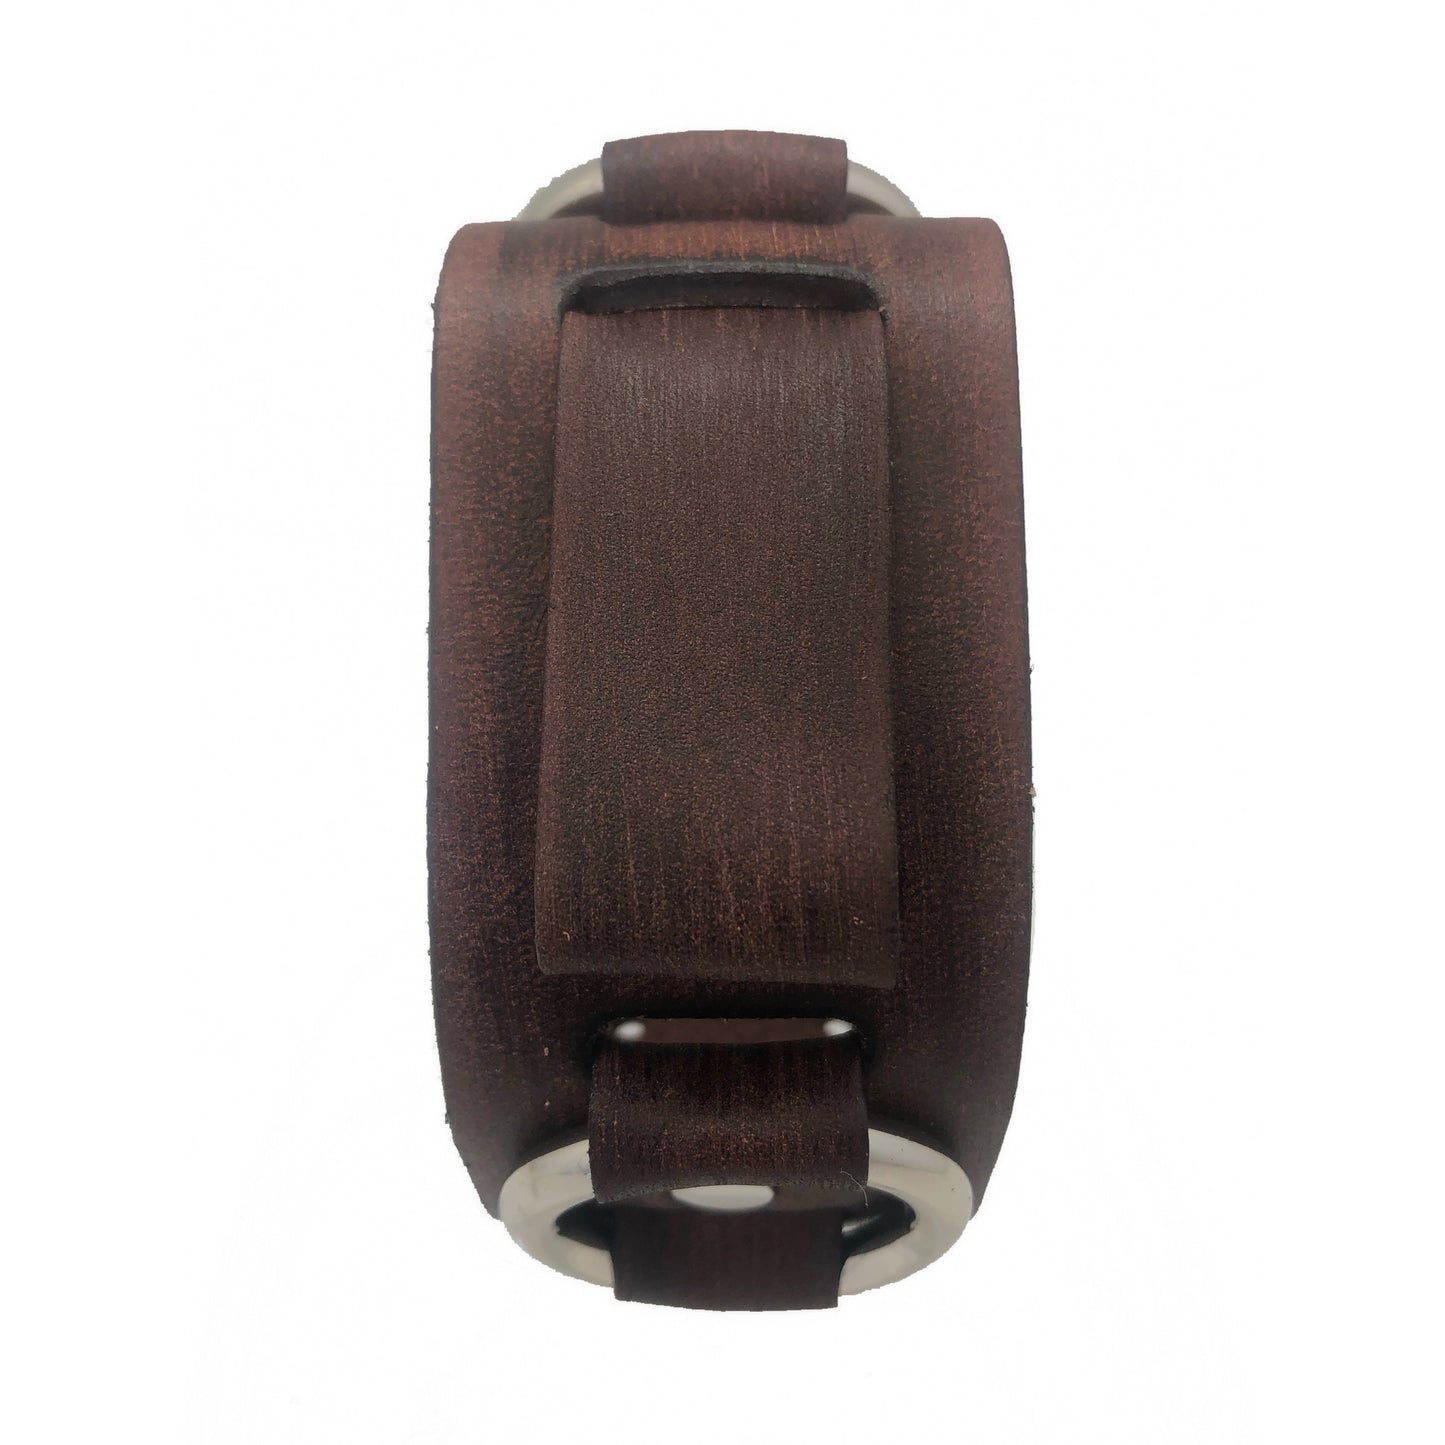 Ring Distressed Brown Leather Cuff